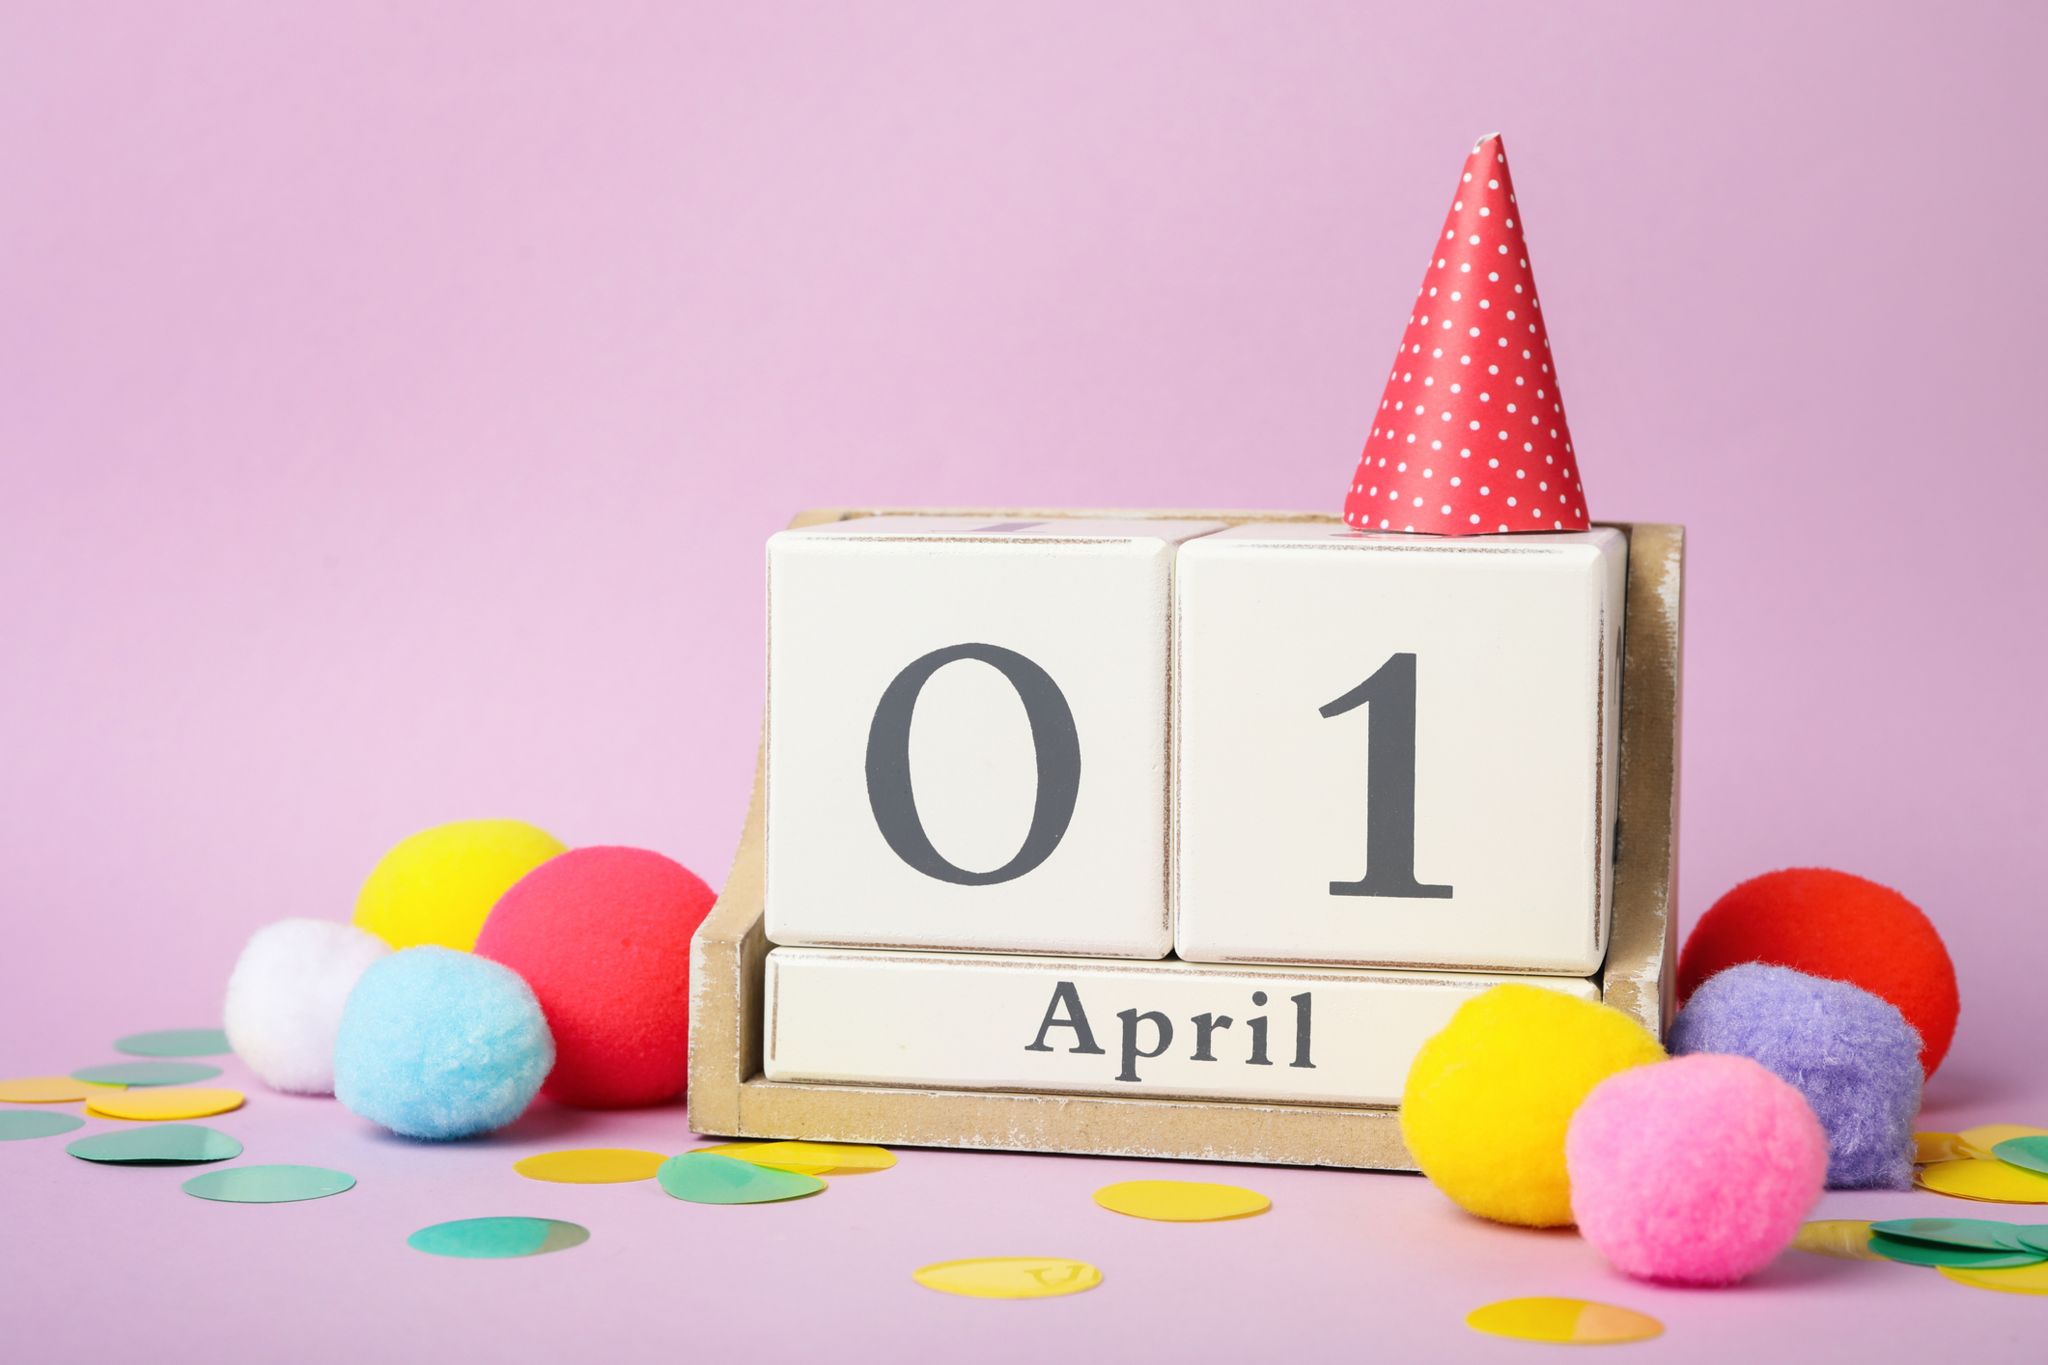 What have you been up to this April Fools' Day? BBC Newsround